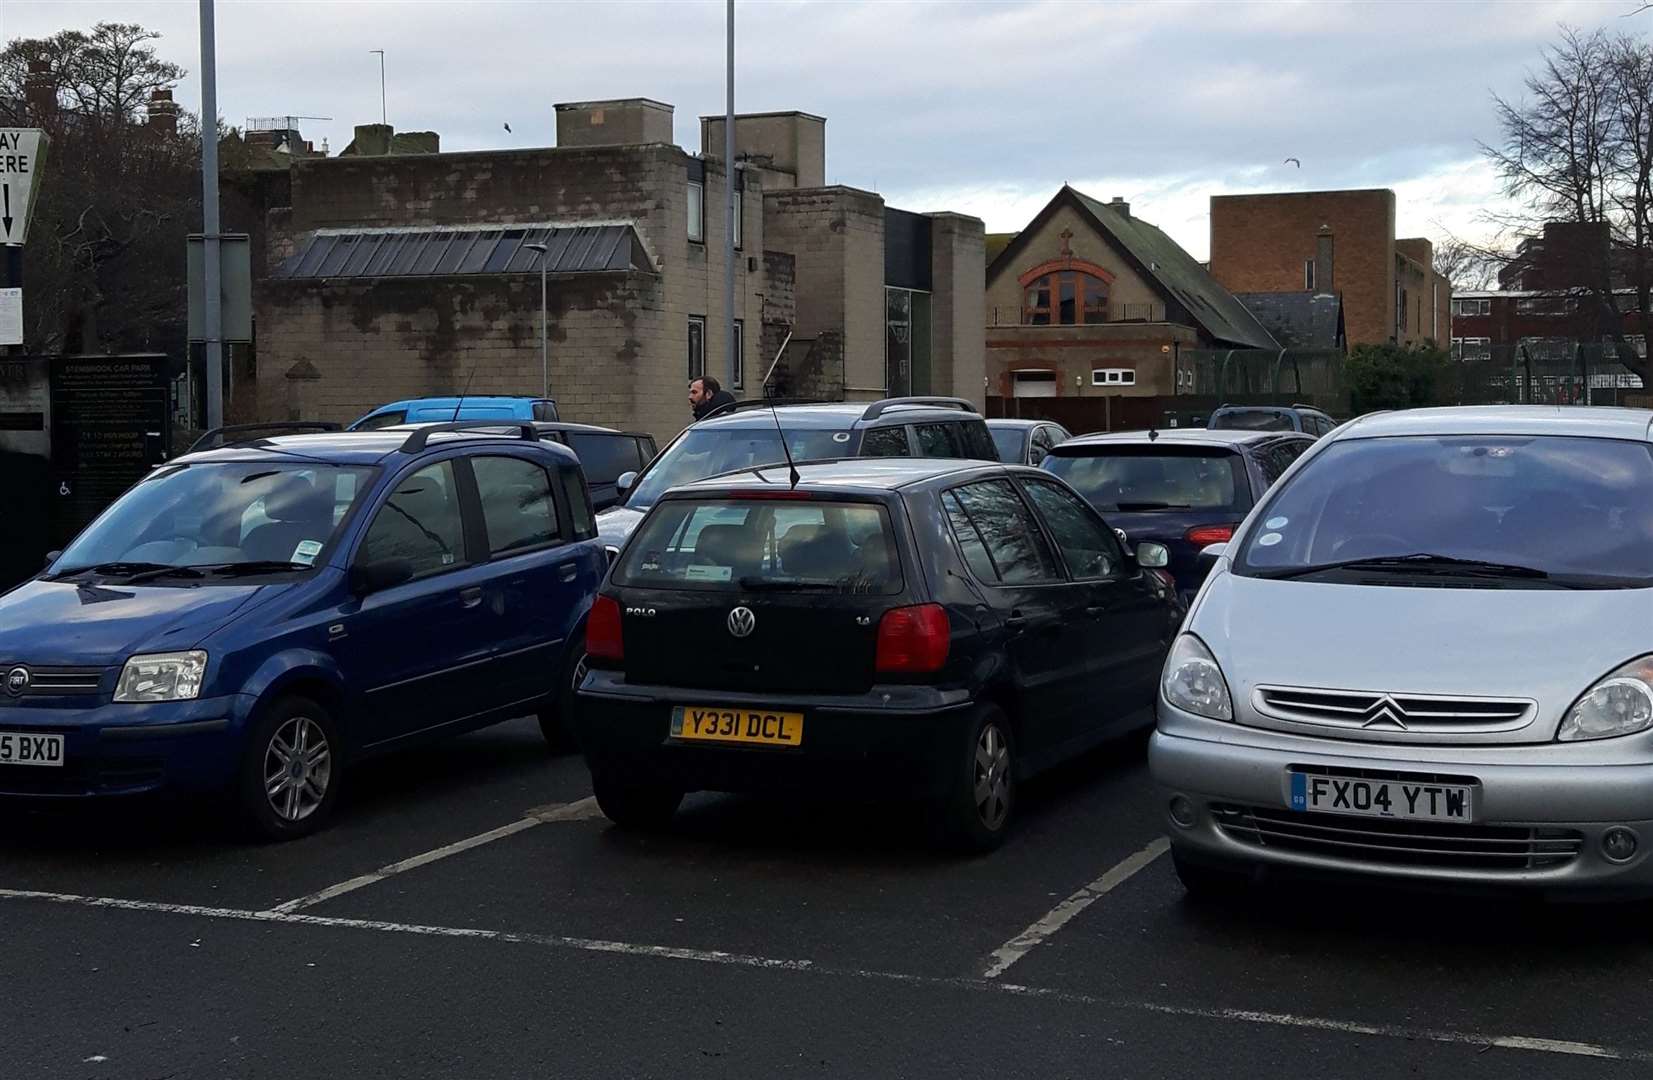 The Stembrook car park in Dover, which could be free of charge at Christmas and the New Year. Library image